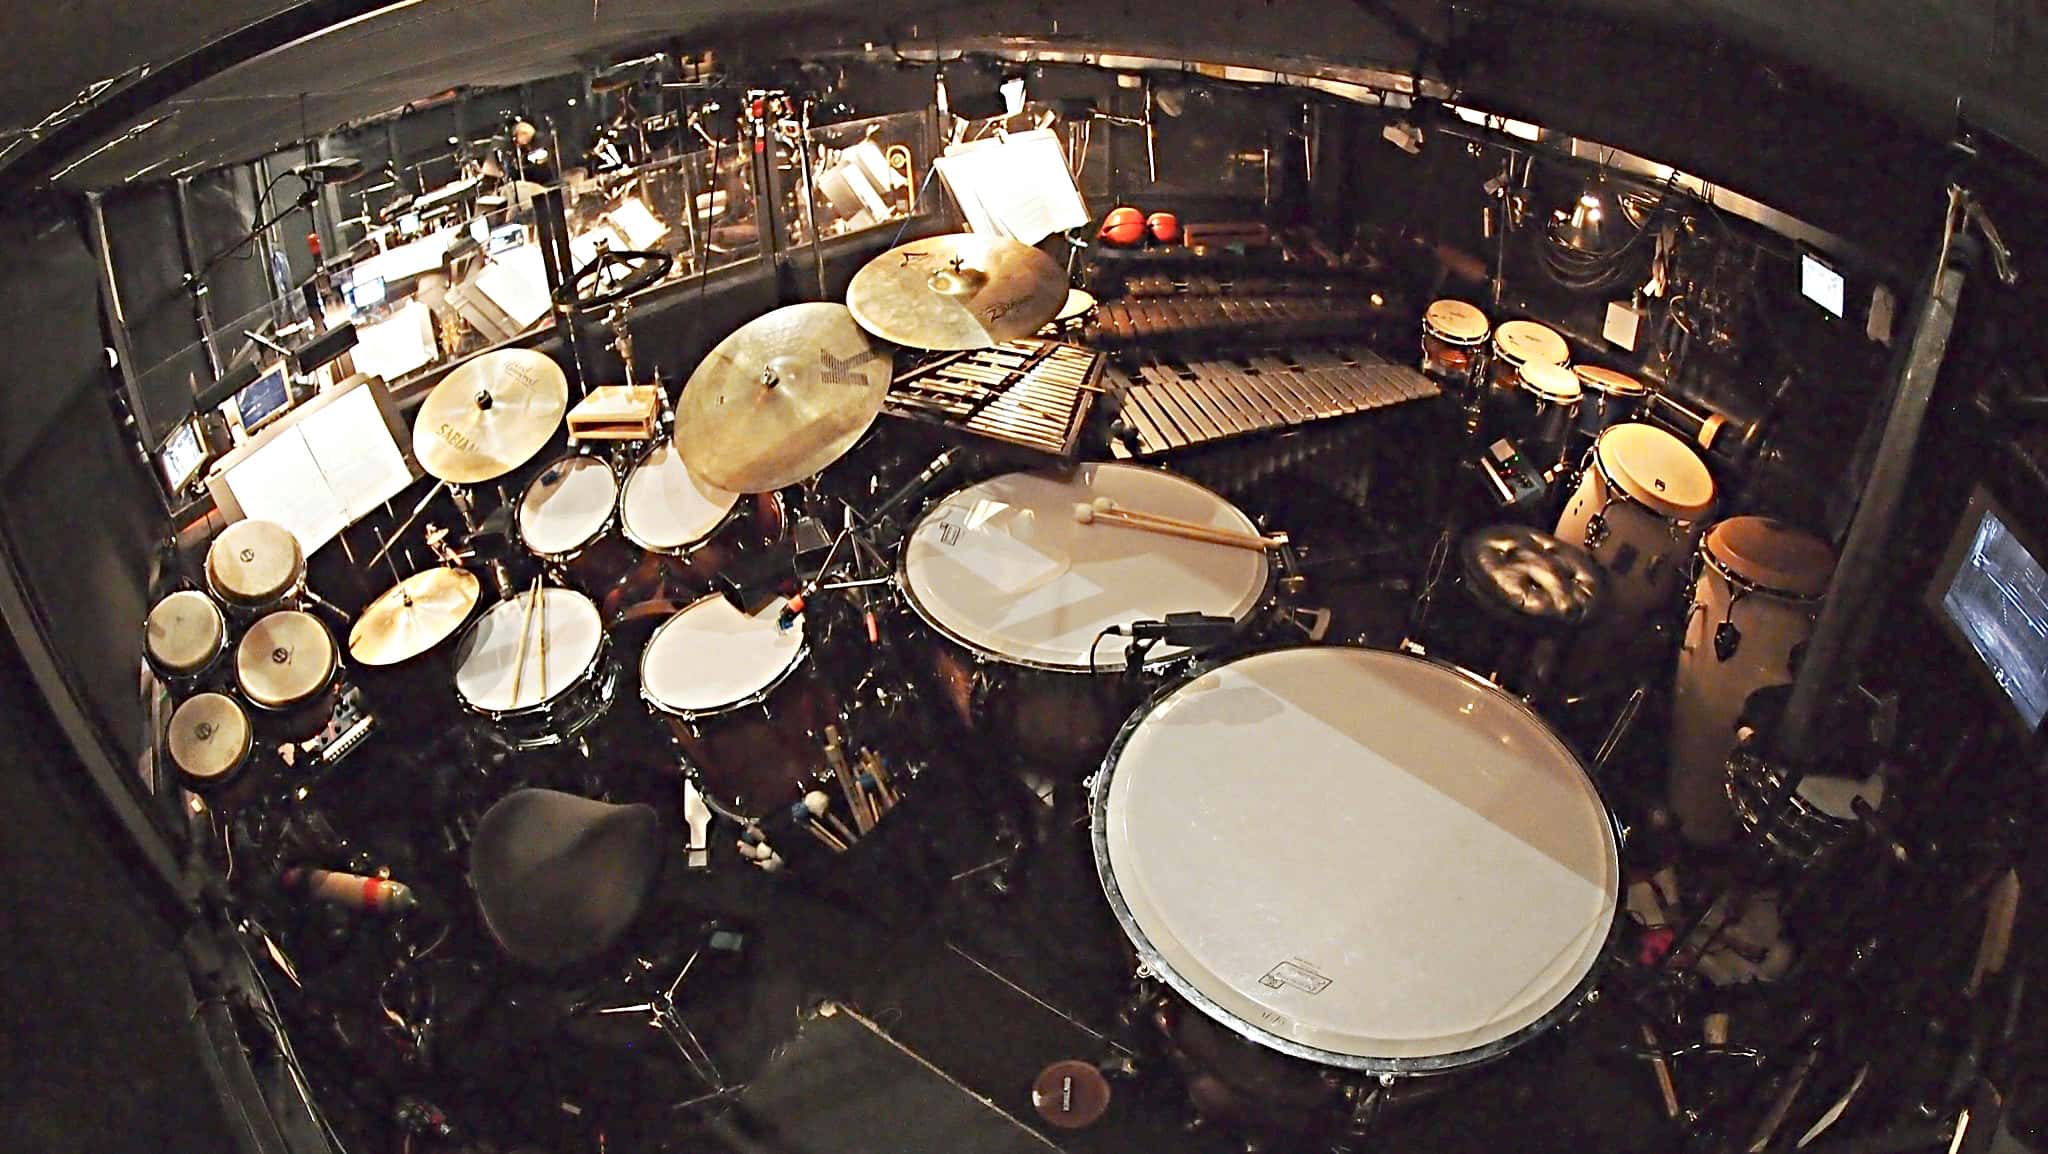 Alec Wilmart's drum set setup for West Side Story at the 5th Avenue Theatre in Seattle, Washington.